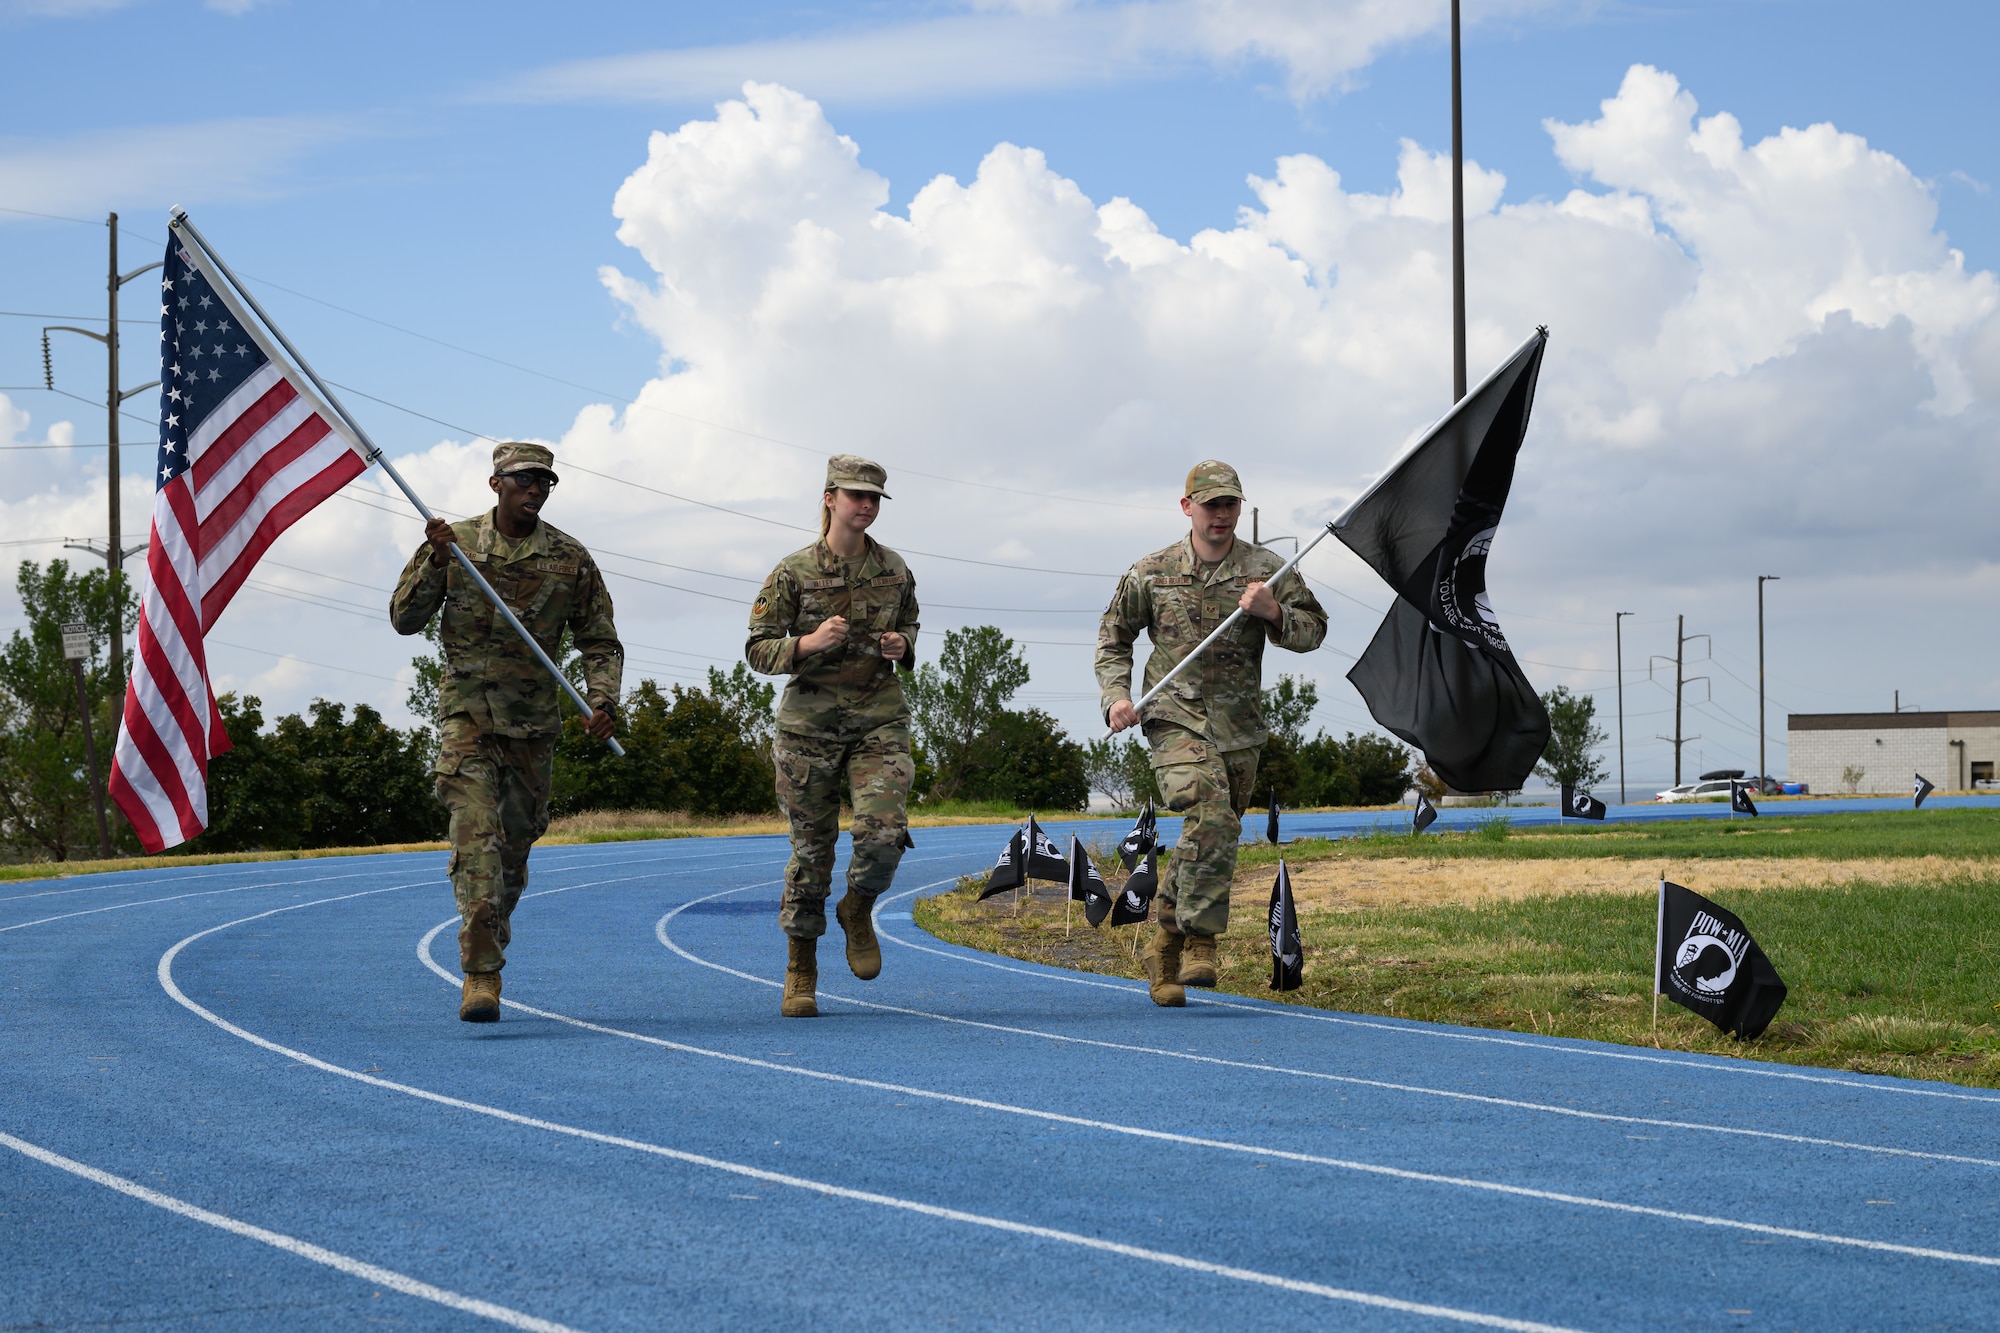 Left to right, Senior Airman Donald Lamar, Airman 1st Class Ella Valley, and Airman 1st Class Matthew Taylor, 75th Medical Group, run the POW/MIA flag around the base track during a POW/MIA Remembrance Week event at Hill Air Force Base, Utah, Sept. 15, 2022.